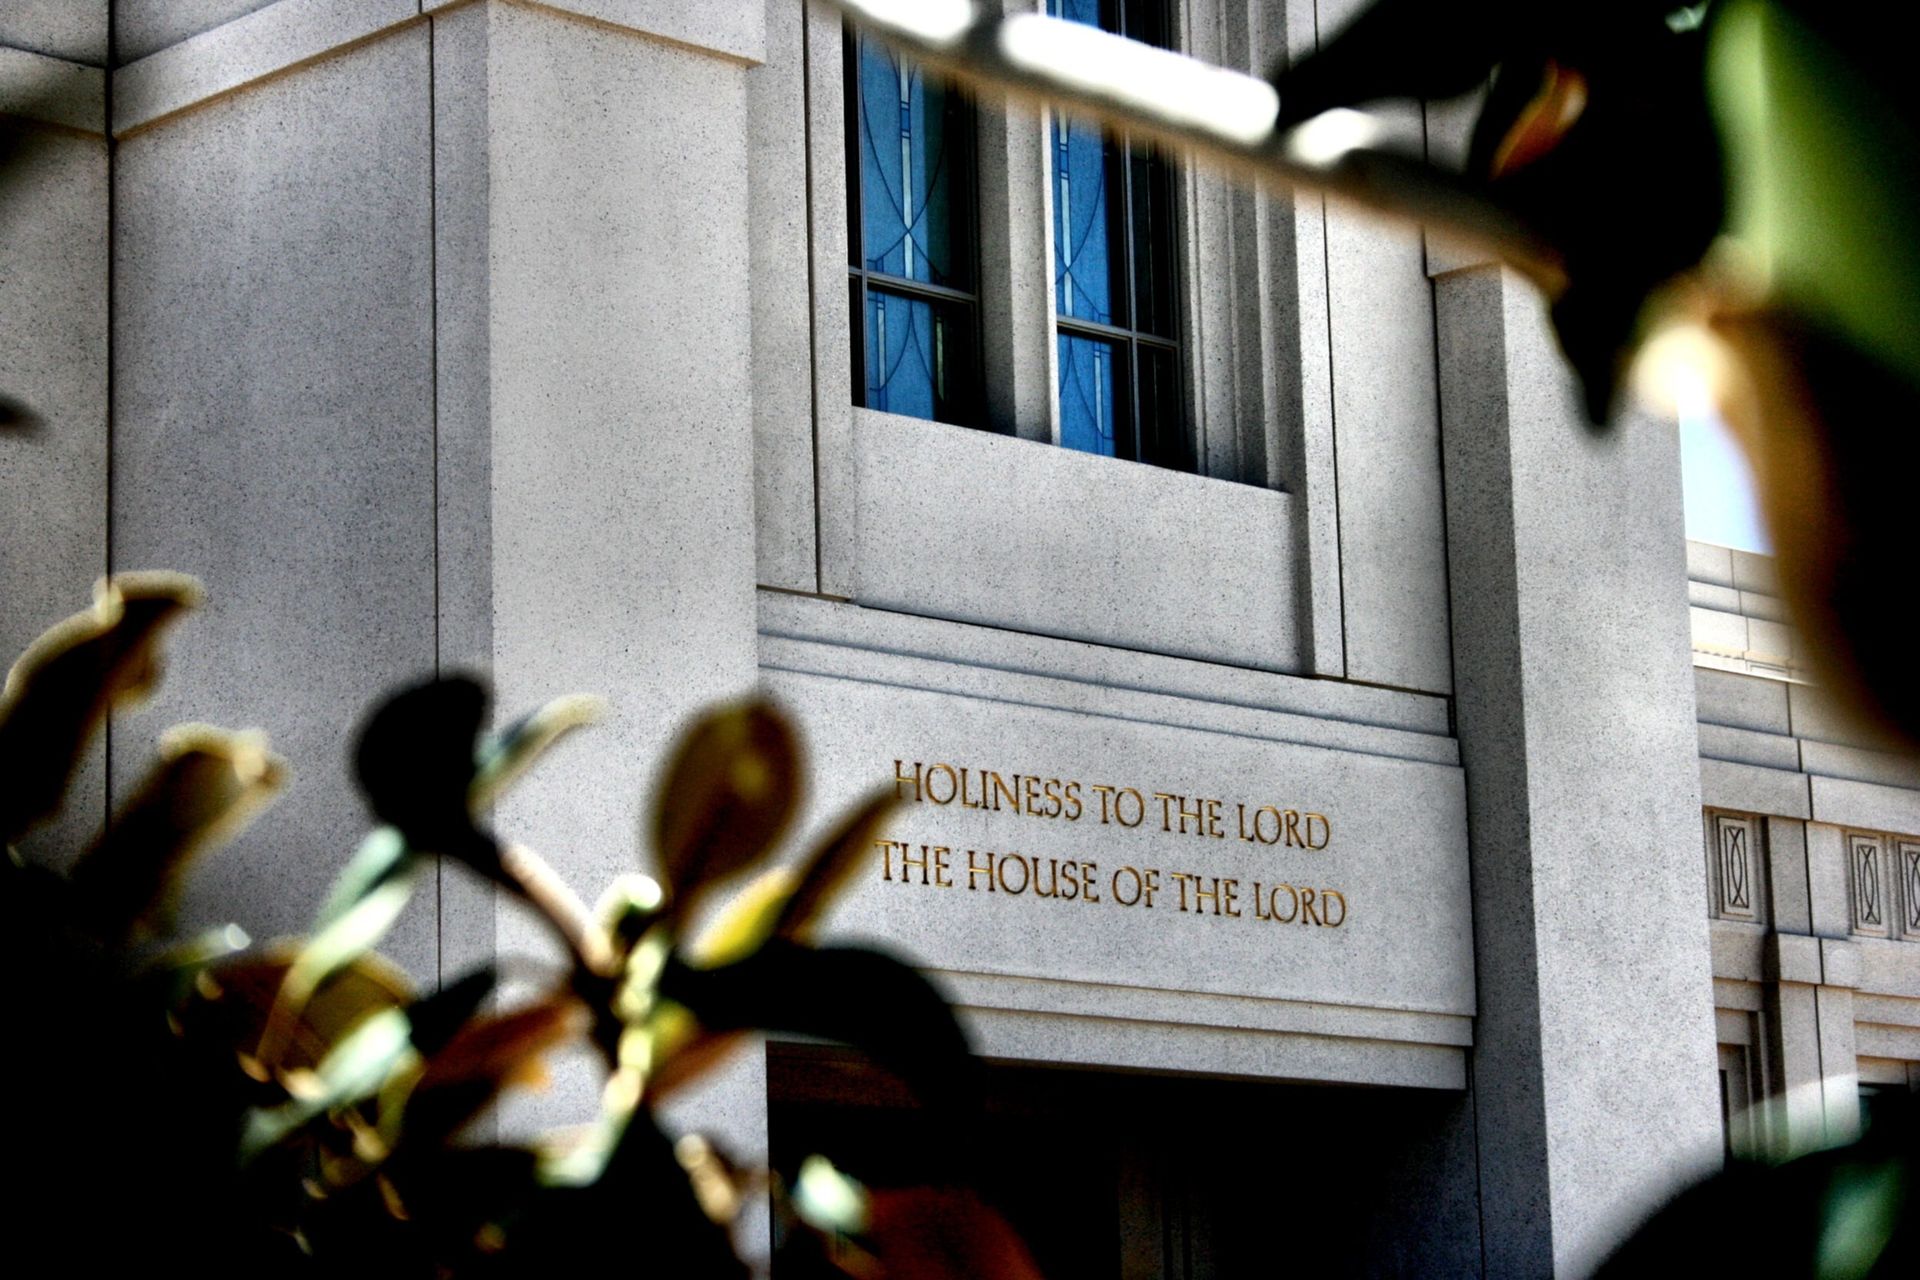 The Gila Valley Arizona Temple inscription “Holiness to the Lord: The House of the Lord” and windows.